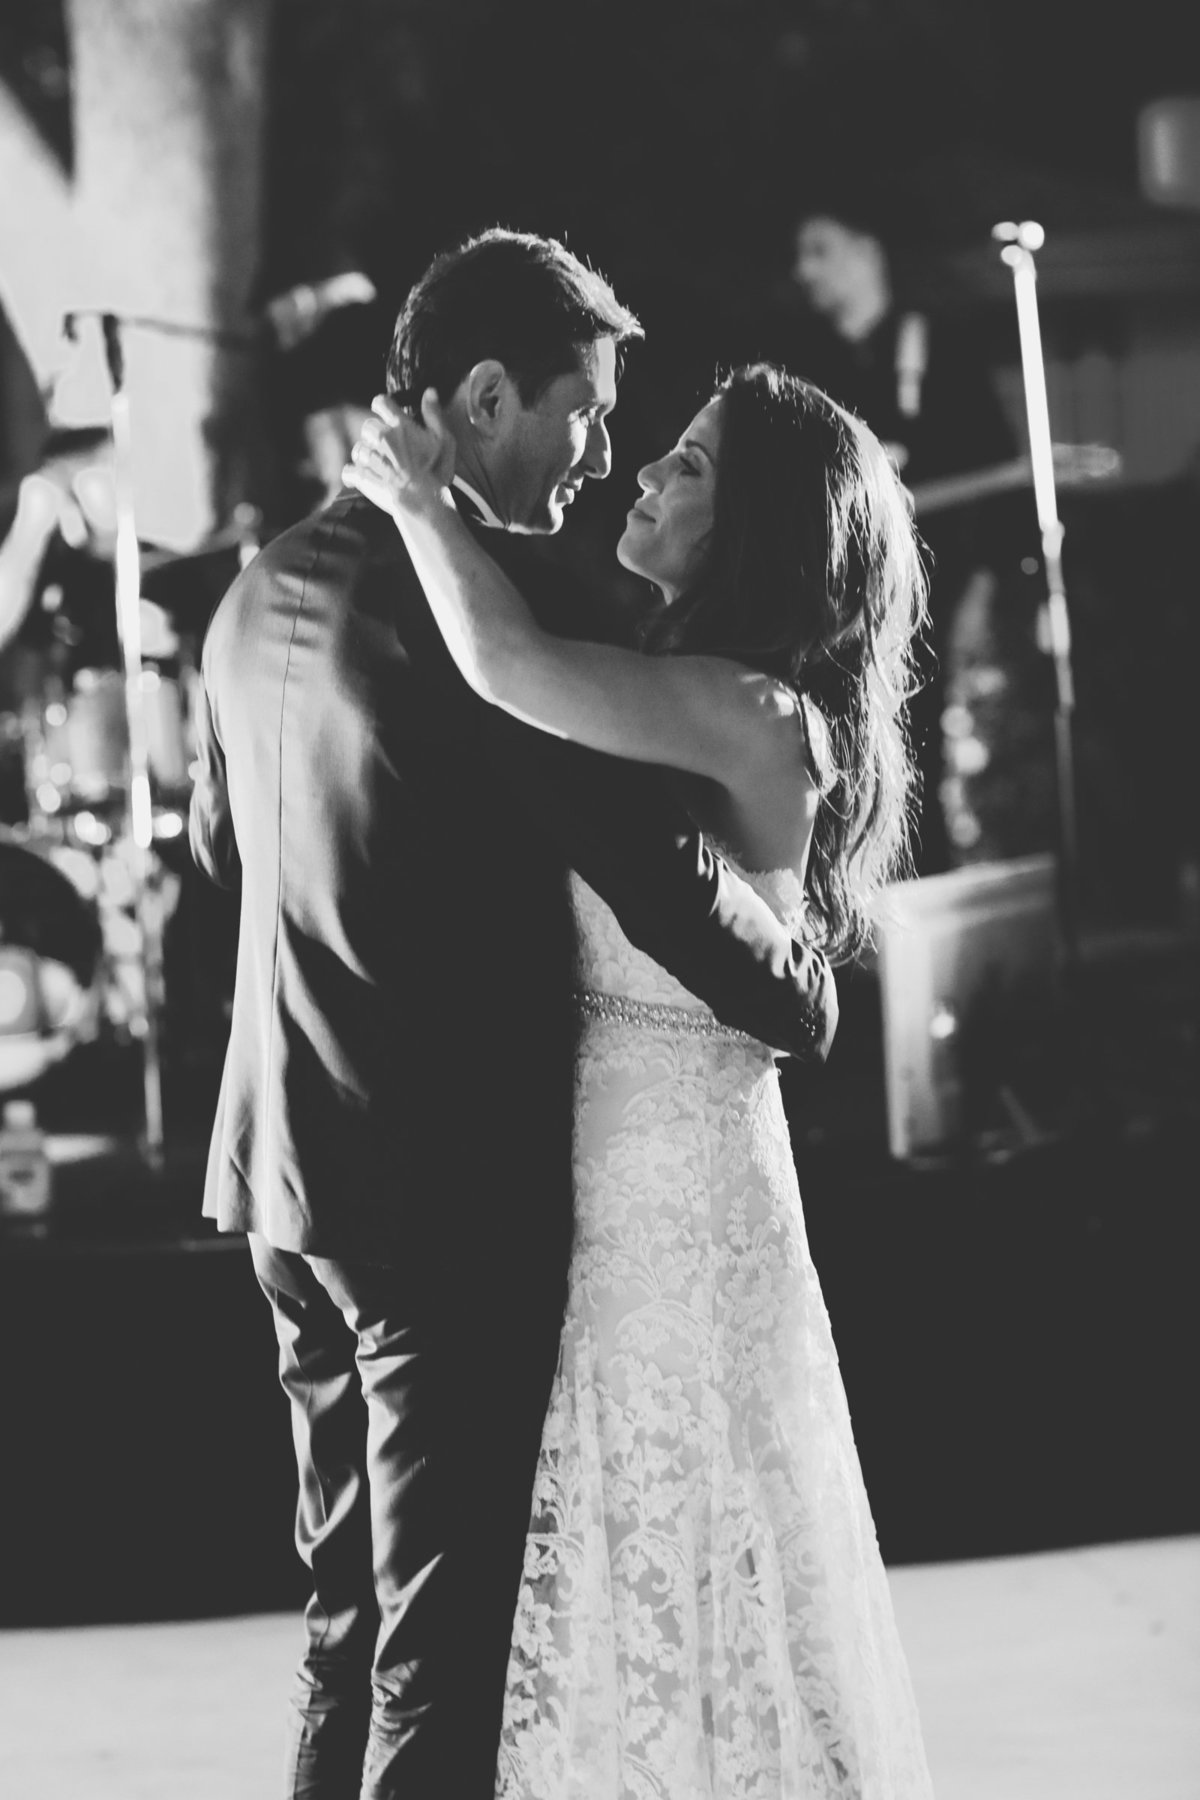 The First Dance in Black and White, Wedding, Engagement, Proposal, Destination Photography